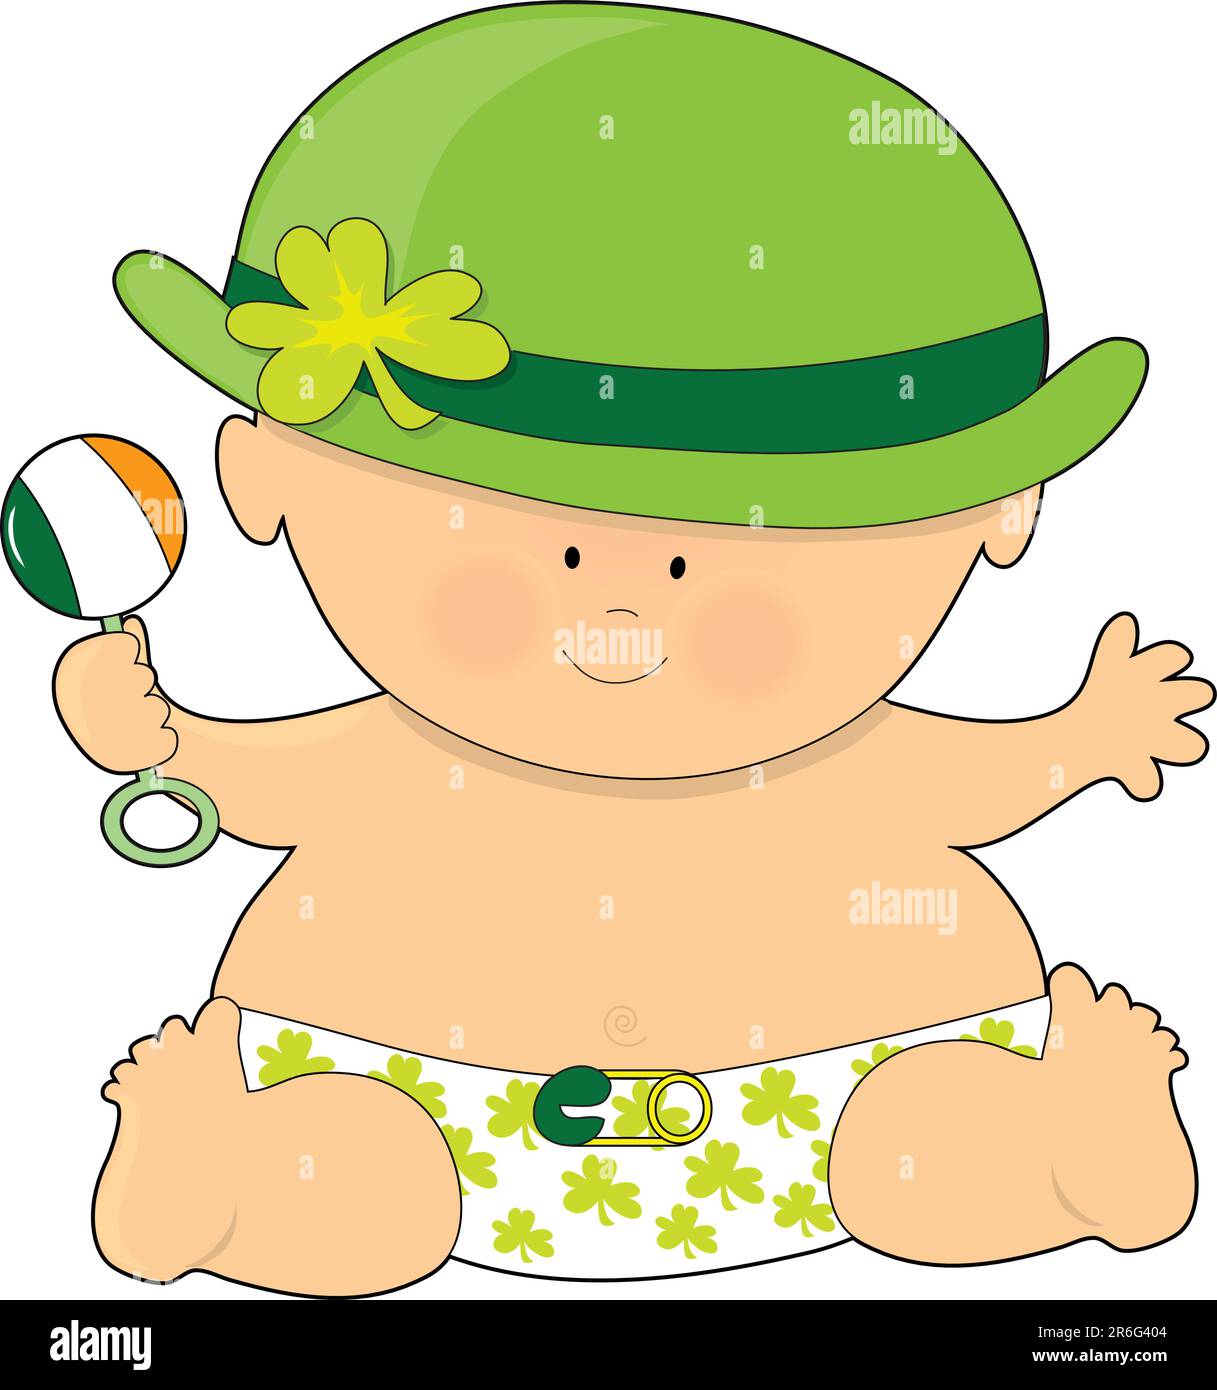 A baby dressed in a diaper and bowler hat with shamrocks Stock Vector